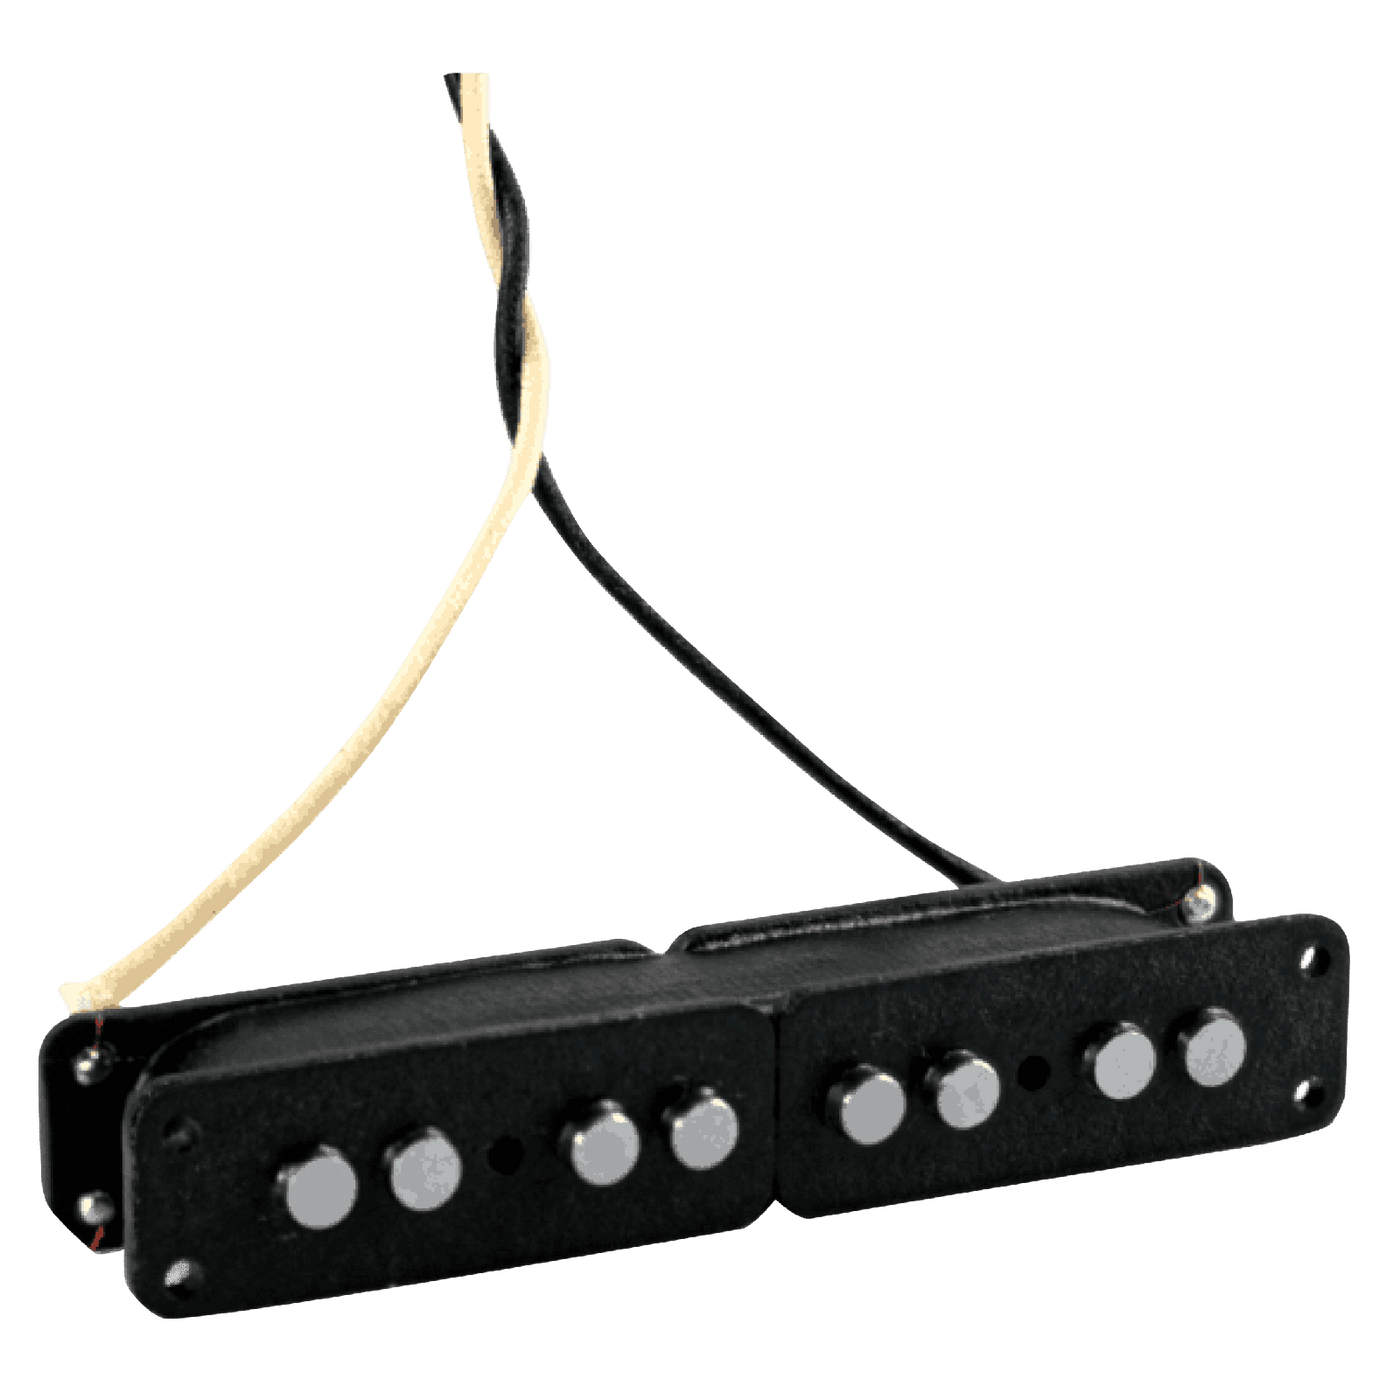 Lindy Fralin Split Jazz 4 Black Cover - DescriptionLindy Fralin Split Jazz Bass Pickups offer a loud, clear and even response to four string bass players with no hum. This bass pickup allows you to get all of the Jazz-Bass vibe that you love, minus the hu